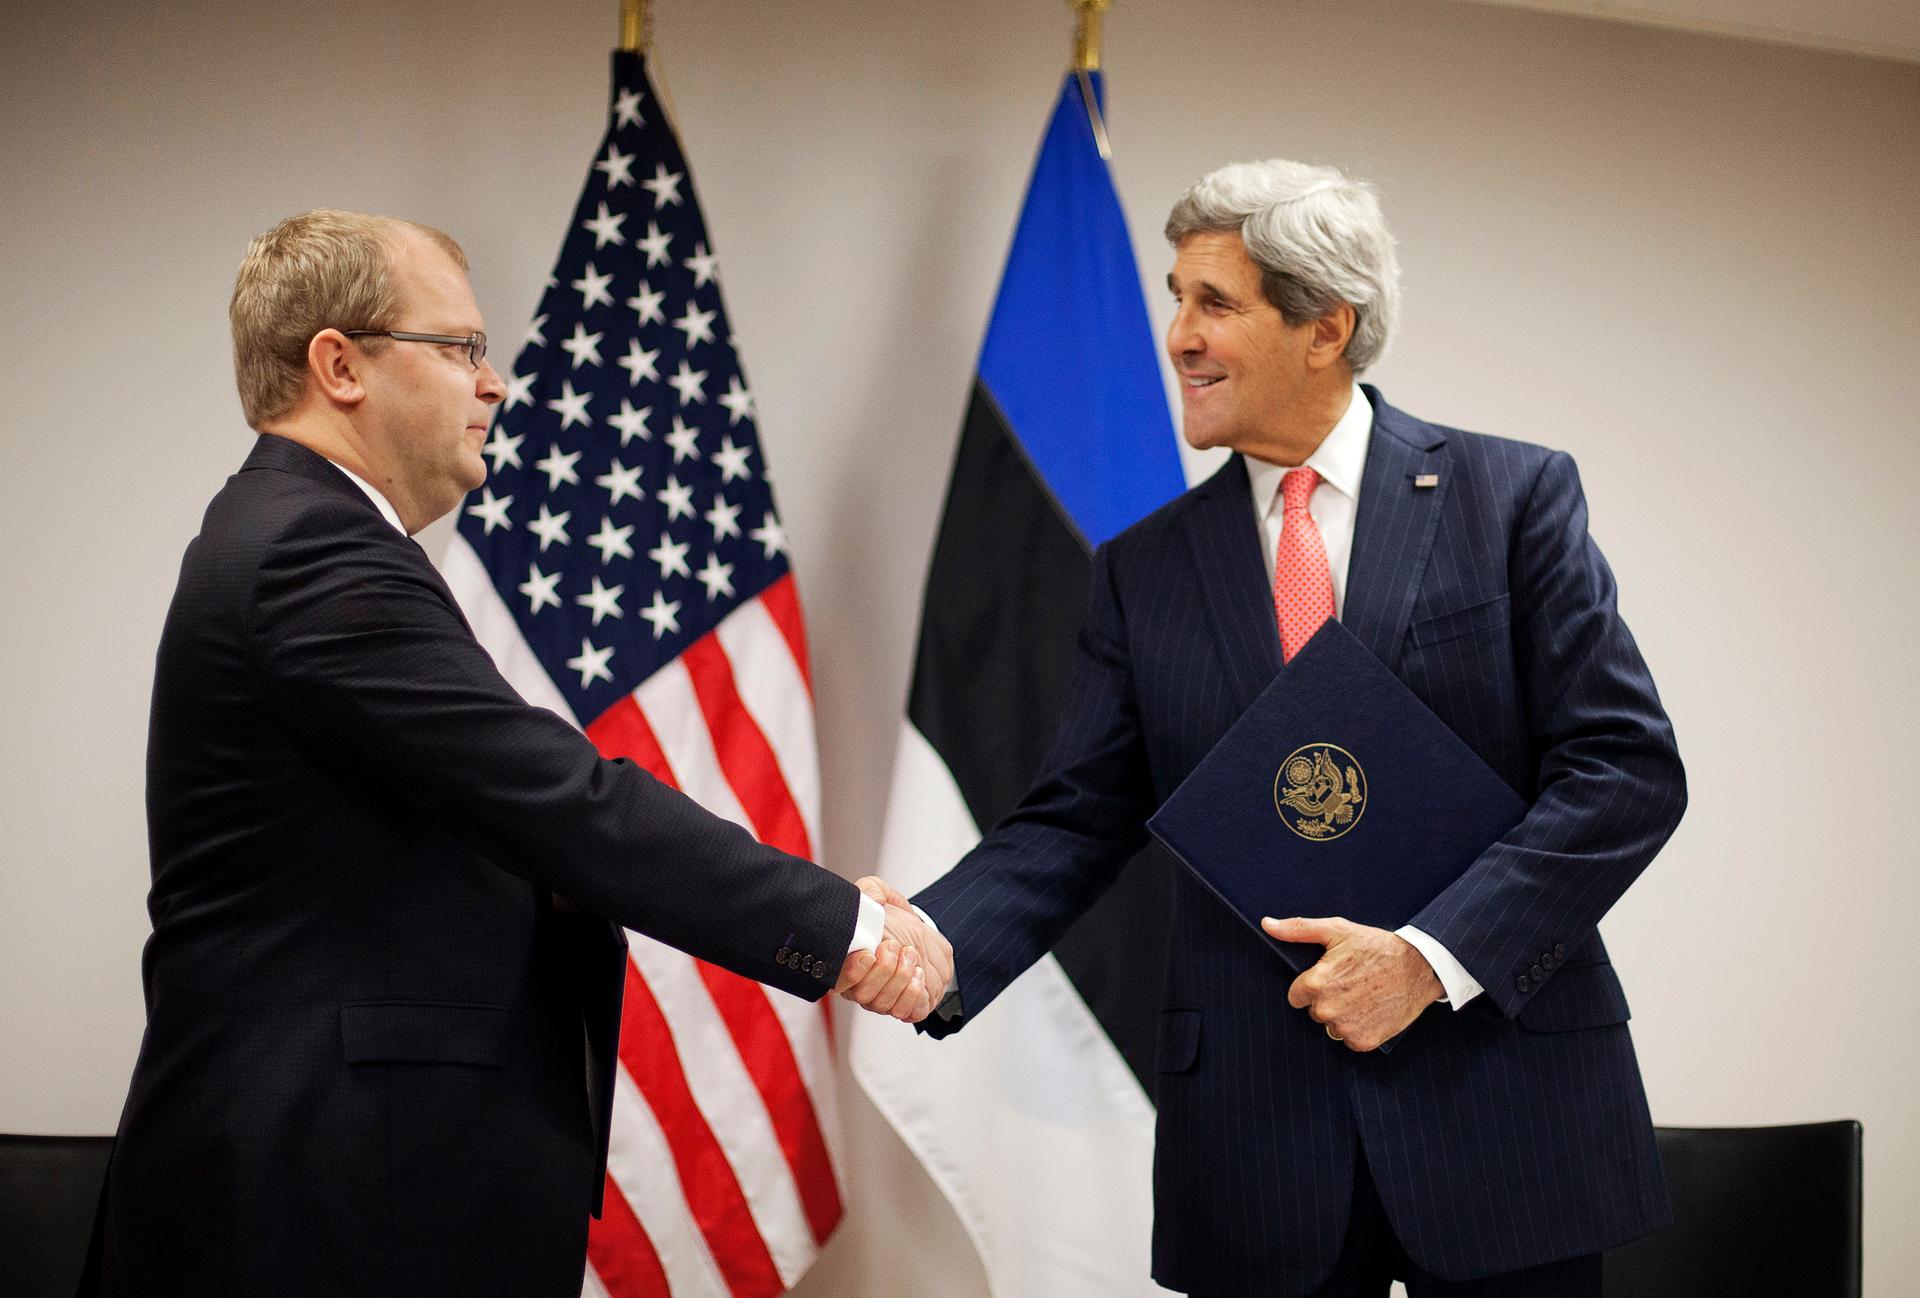 US Secretary of State John Kerry and Estonian Foreign Minister Urmas Paet sign the US Estonia Partnership Statement at NATO headquarters in Brussels December 3, 2013. The statement affirms the commitment of both countries to continue working together to e